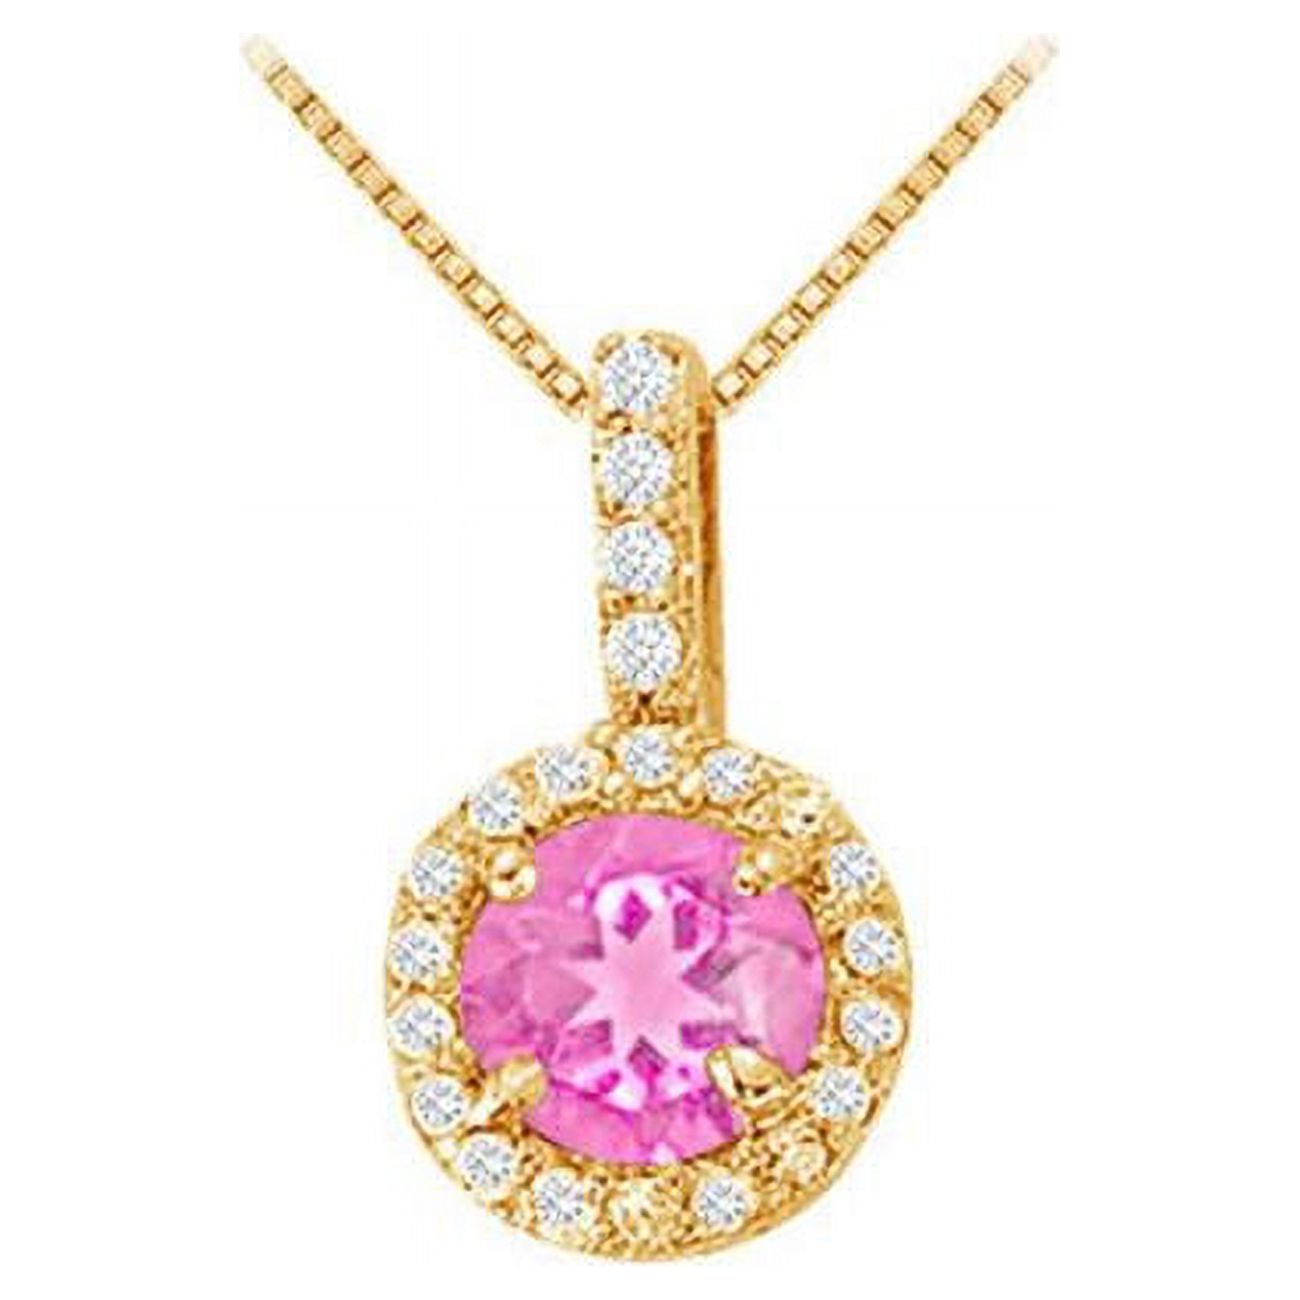 Fine Jewelry Vault UBUNPD31481Y14CZPS600 Fancy Round Created Pink Sapphire and Cubic Zirconia Halo Pendant in 14K Yellow Gold - image 1 of 1